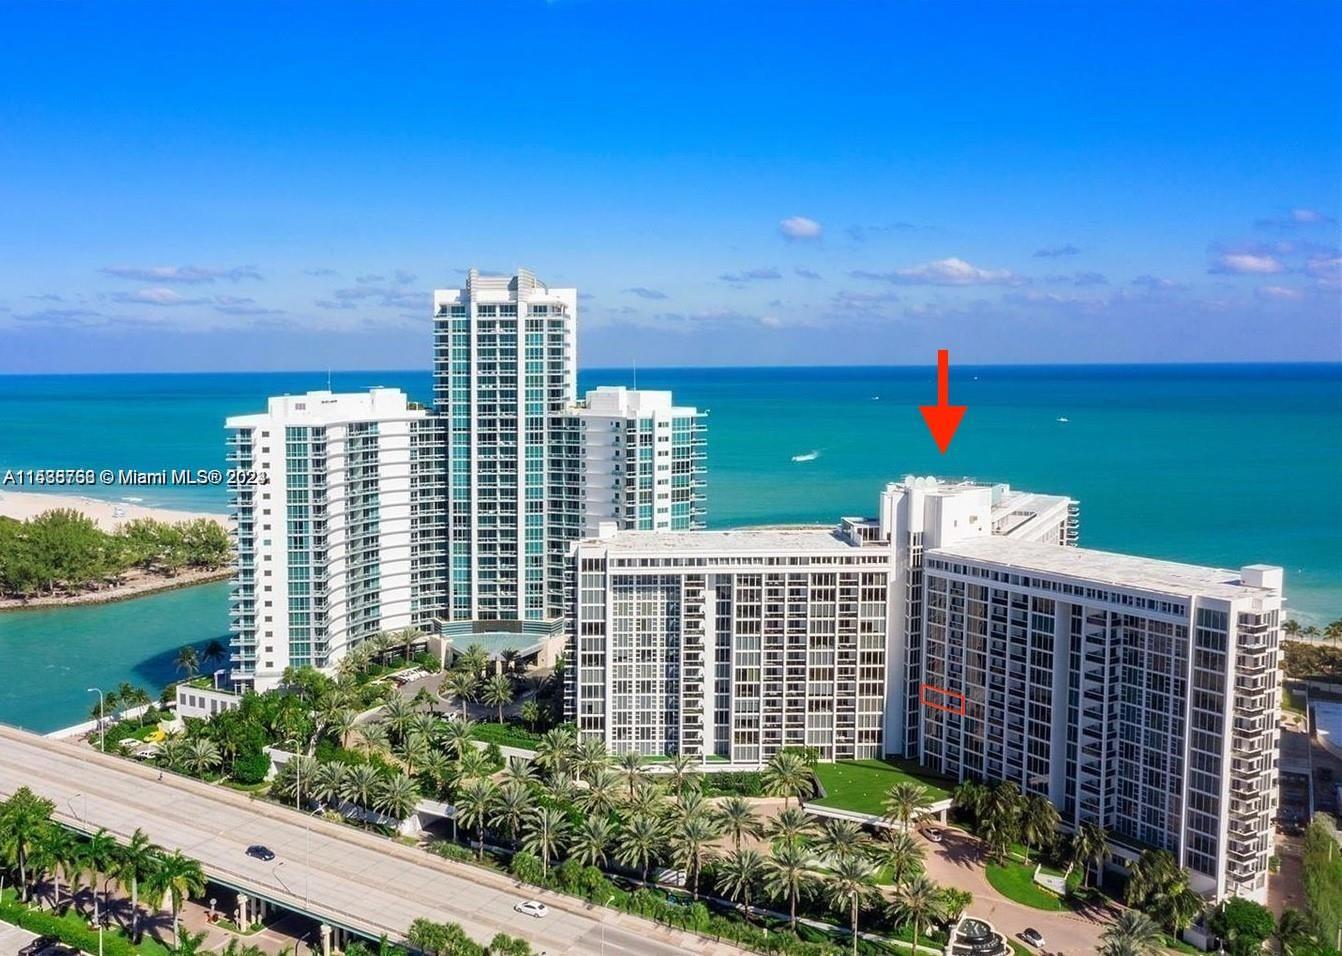 Photo of 10275 Collins Ave #526 in Bal Harbour, FL